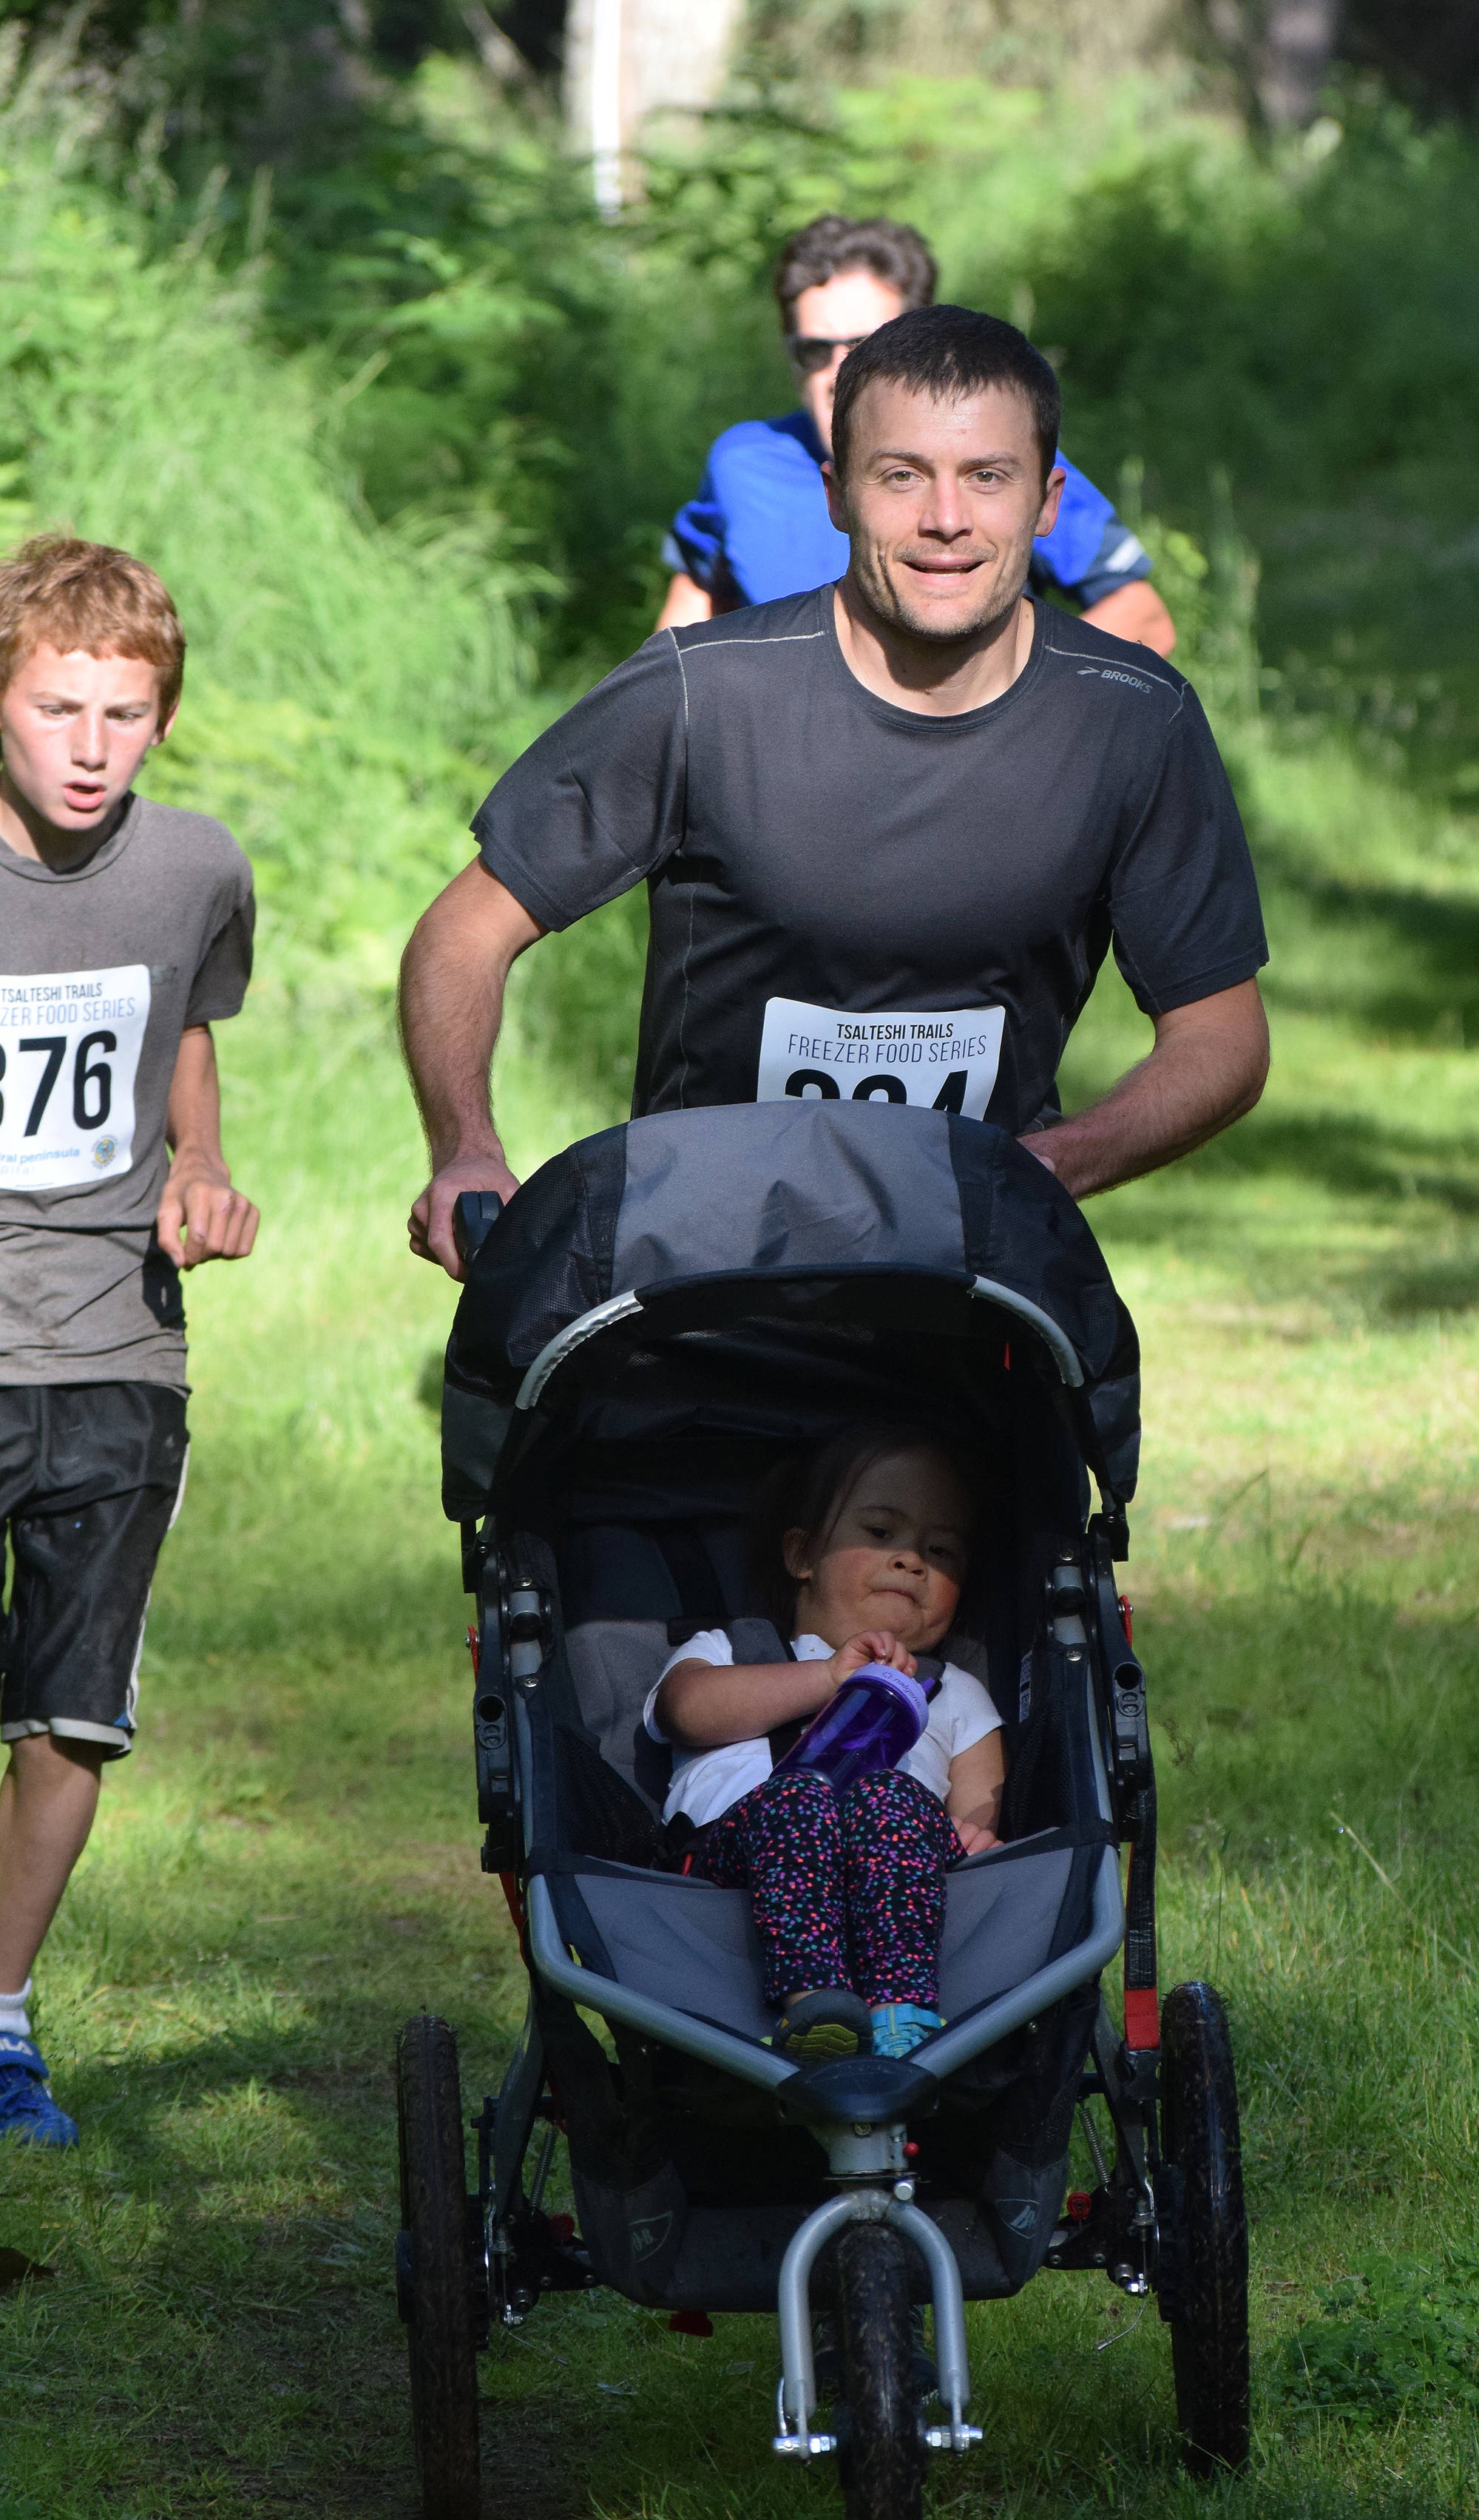 Jake Streich pushes the family stroller Saturday morning in the 10-kilometer race at the Soldotna Rotary Run at the Tsalteshi Trails. (Photo by Joey Klecka/Peninsula Clarion)